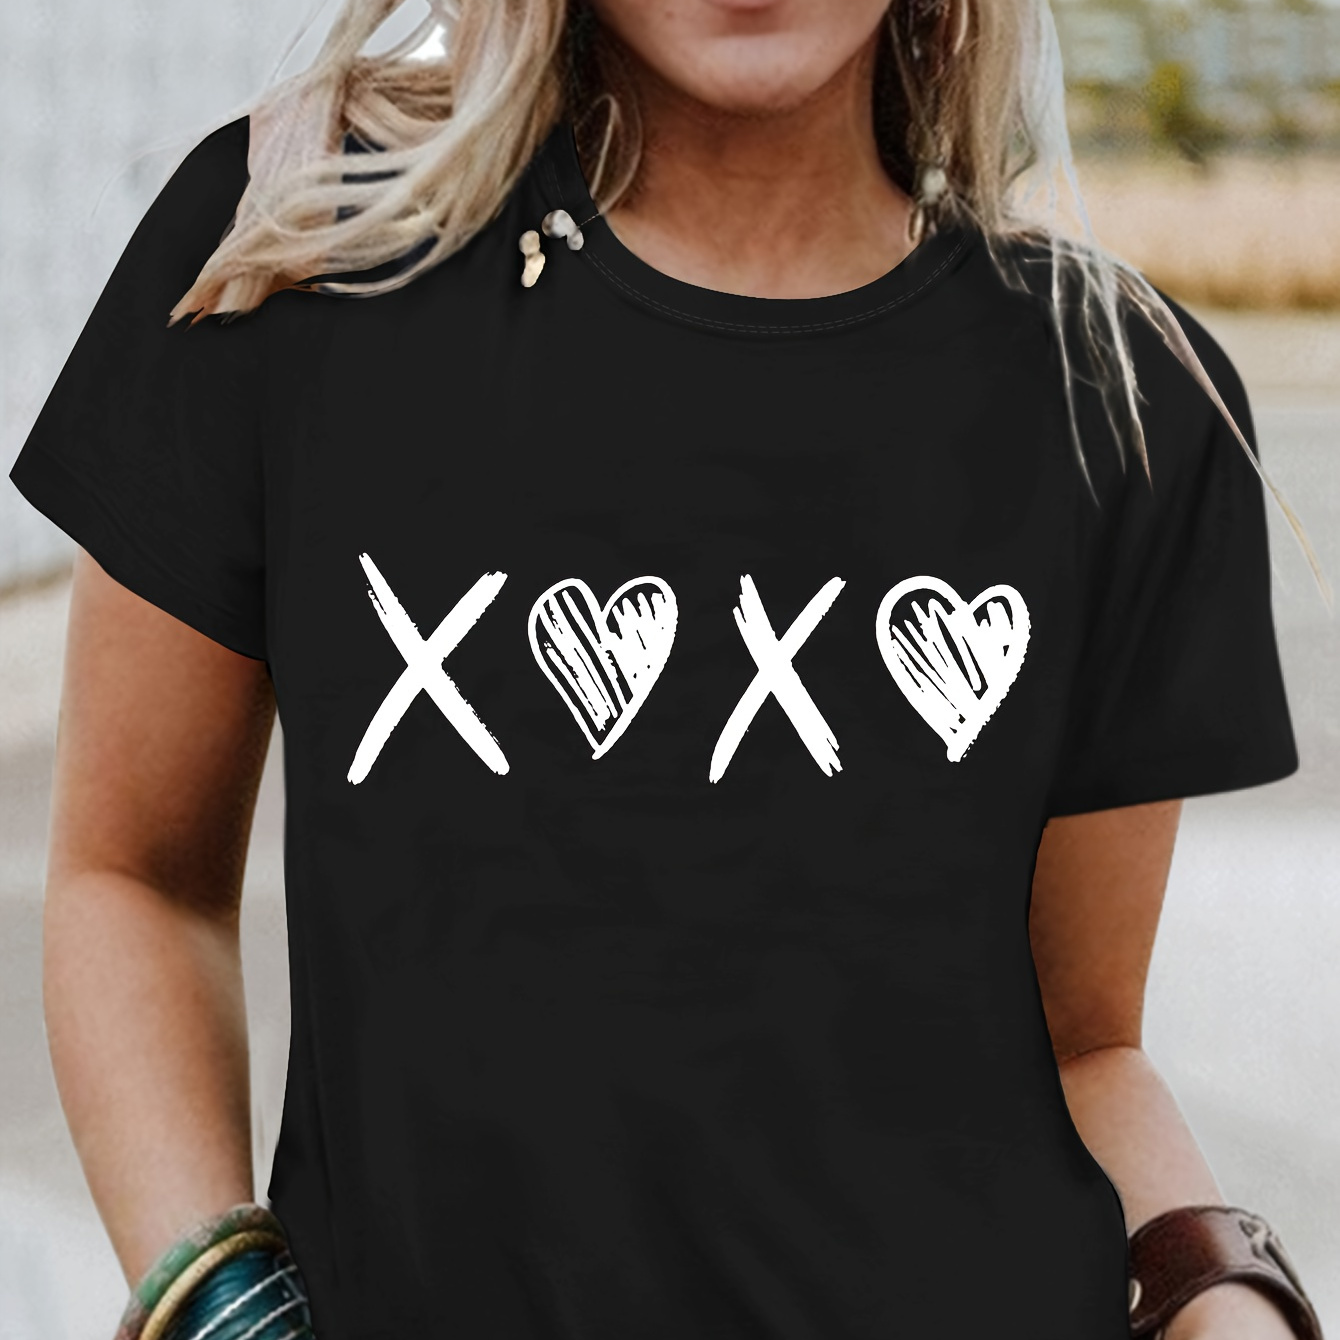 

Valentine's Day Graphic Print T-shirt, Short Sleeve Crew Neck Casual Top For Summer & Spring, Women's Clothing